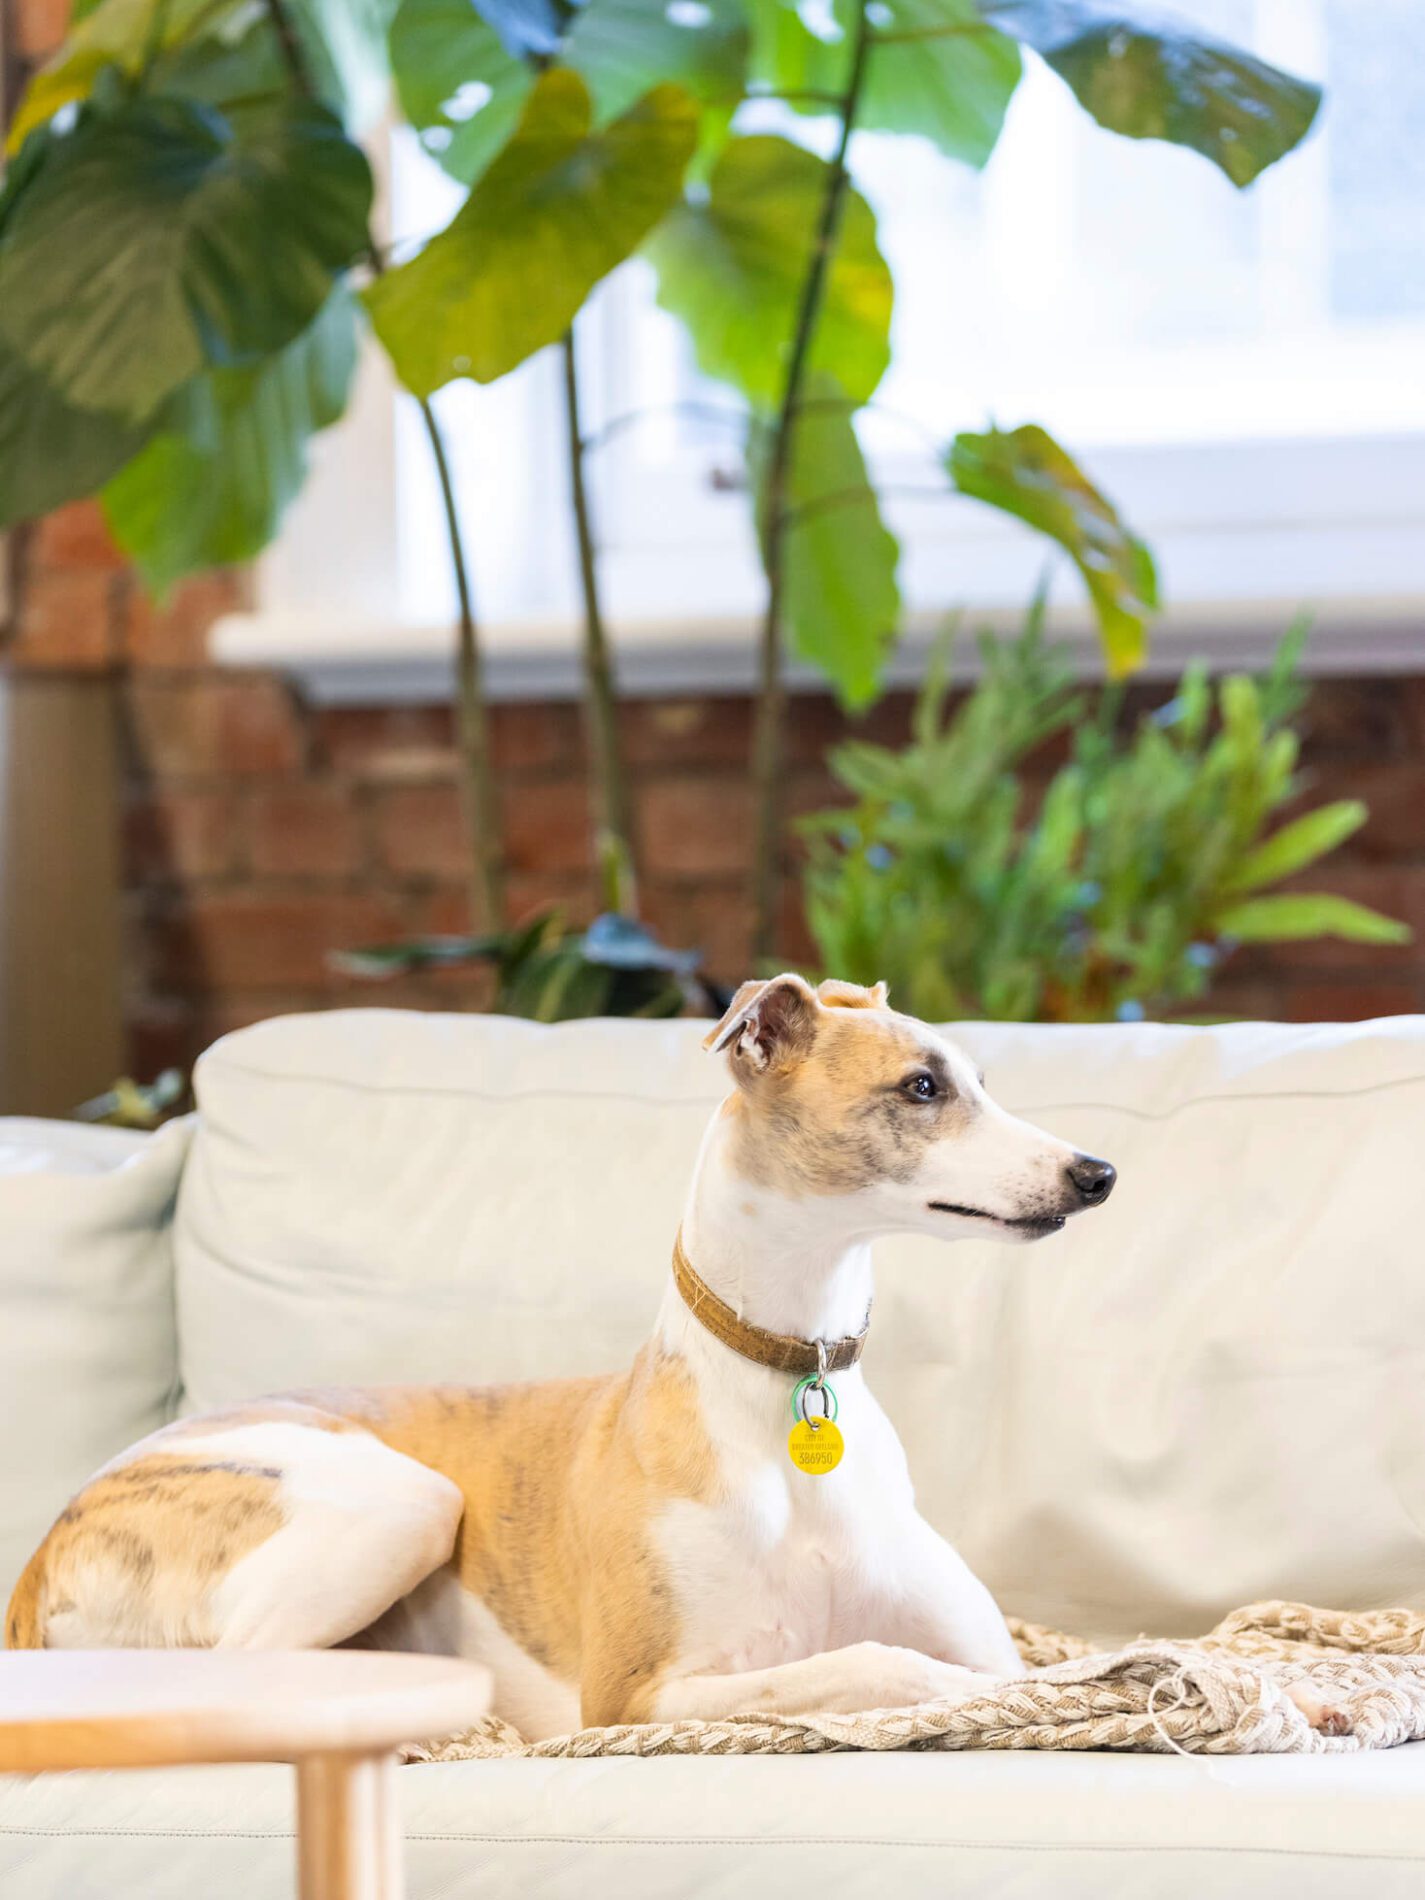 Whippet dog lounges on couch with leafy indoor plants behind